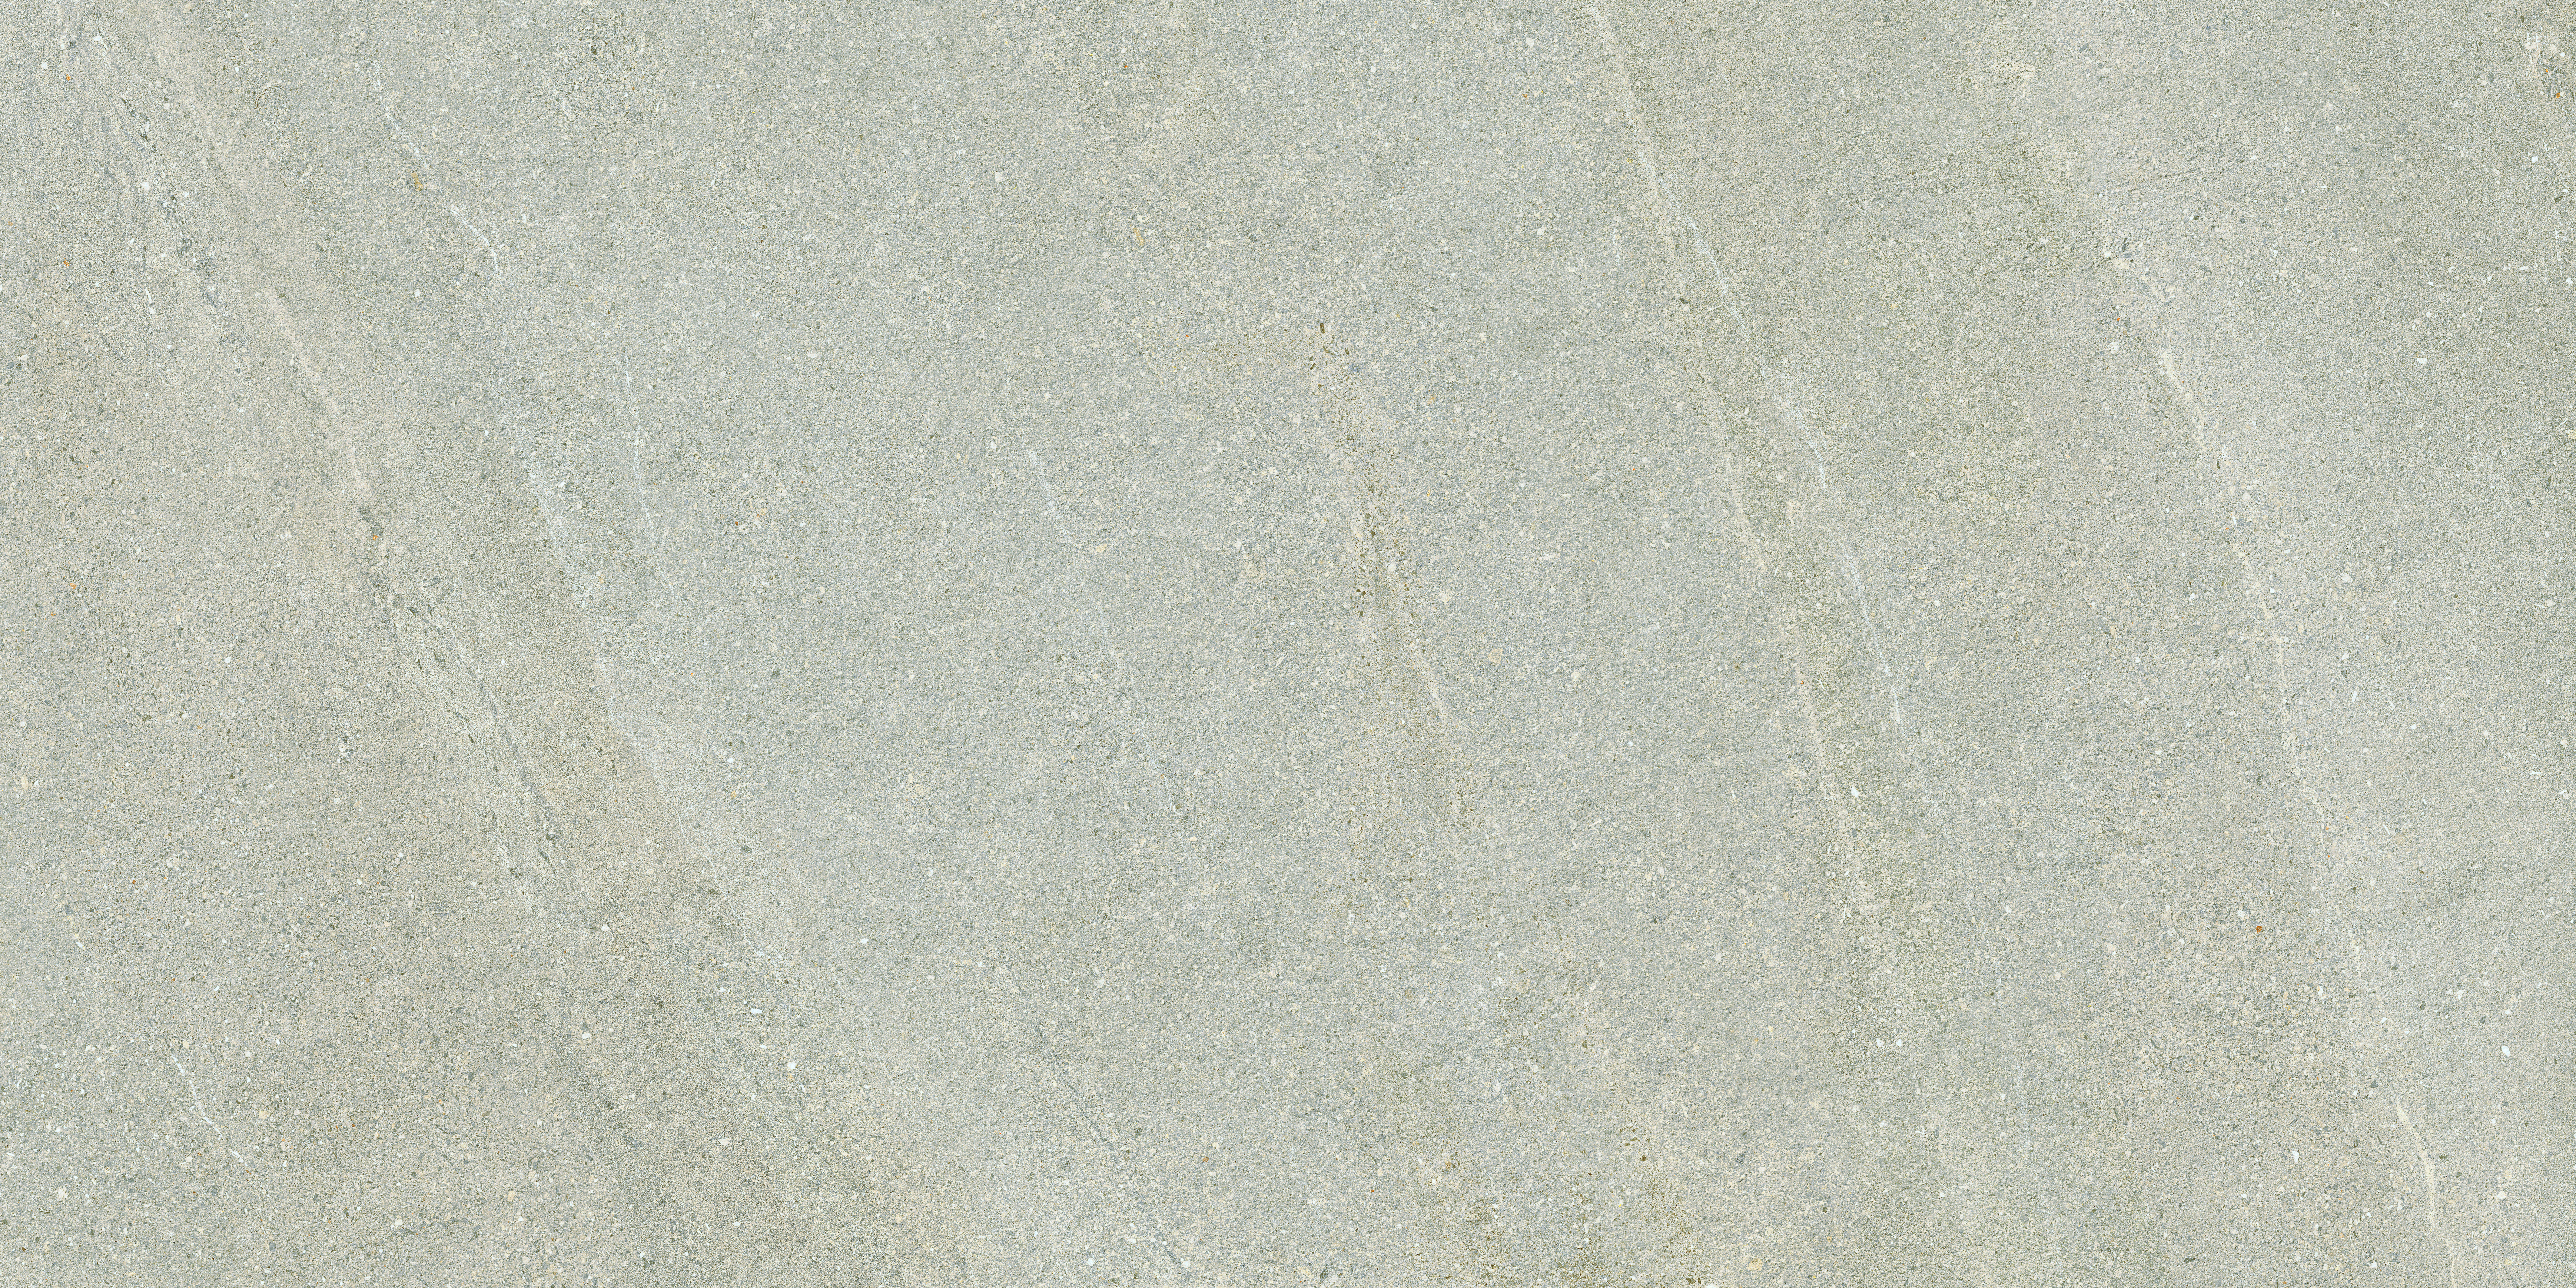 Serenissima Eclettica Argento Naturale 1081675 60x120cm rectified 9,5mm